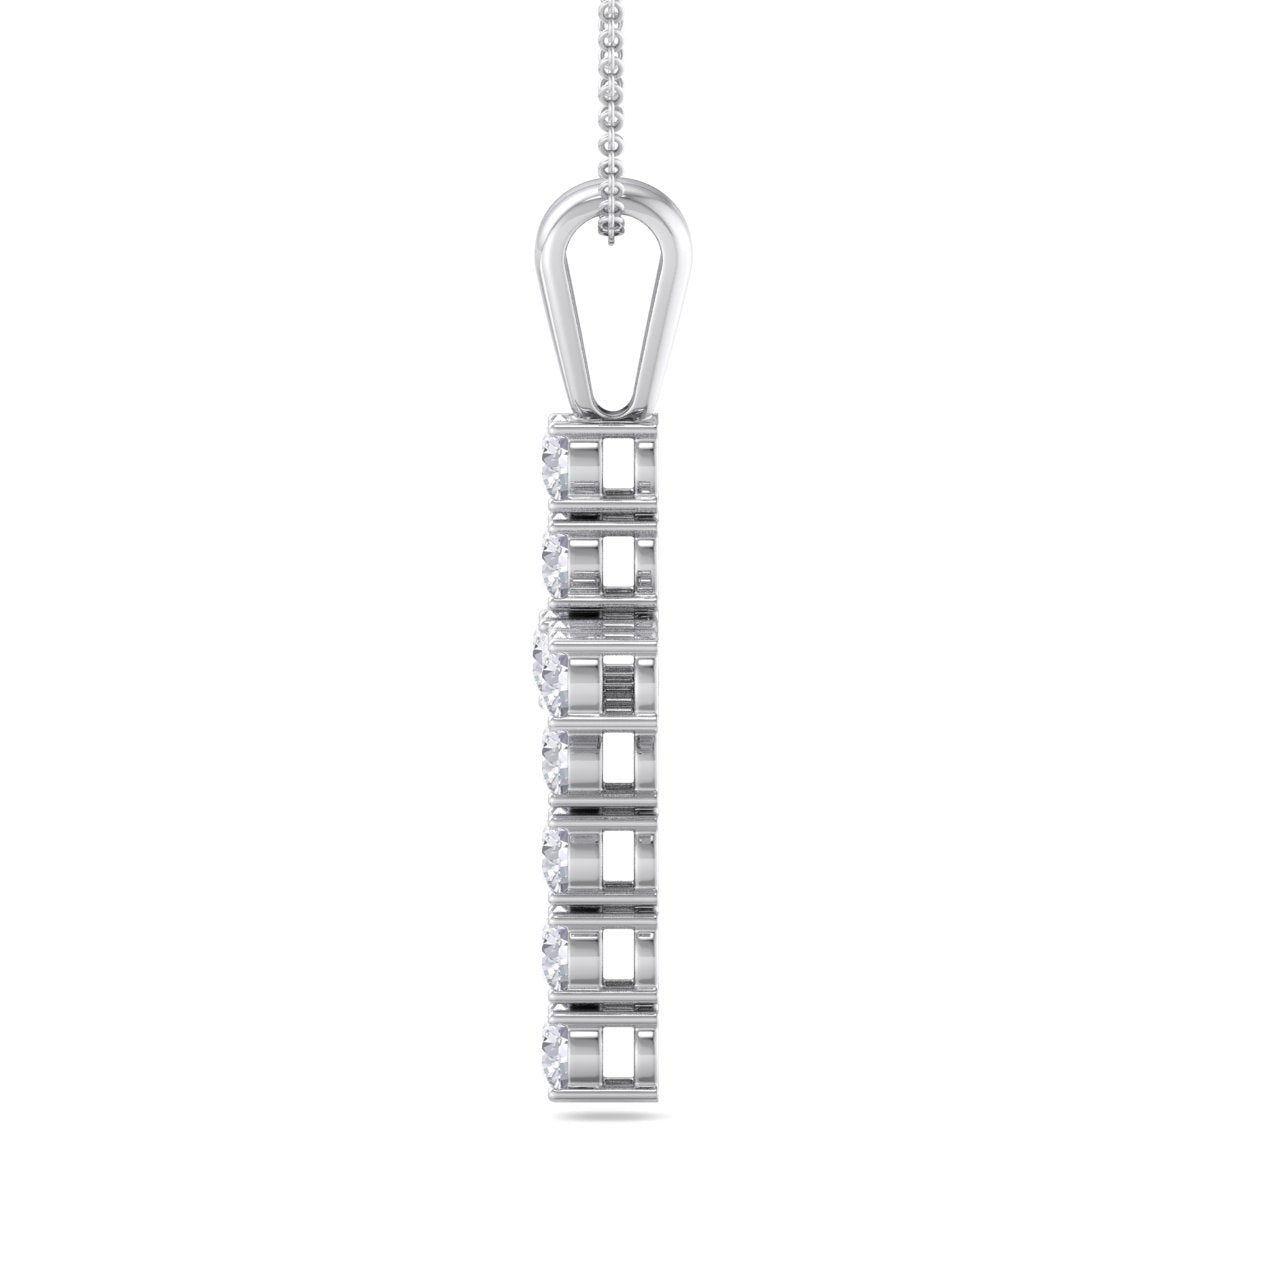 Diamond cross pendant in white gold with white diamonds of 1.00 ct in weight